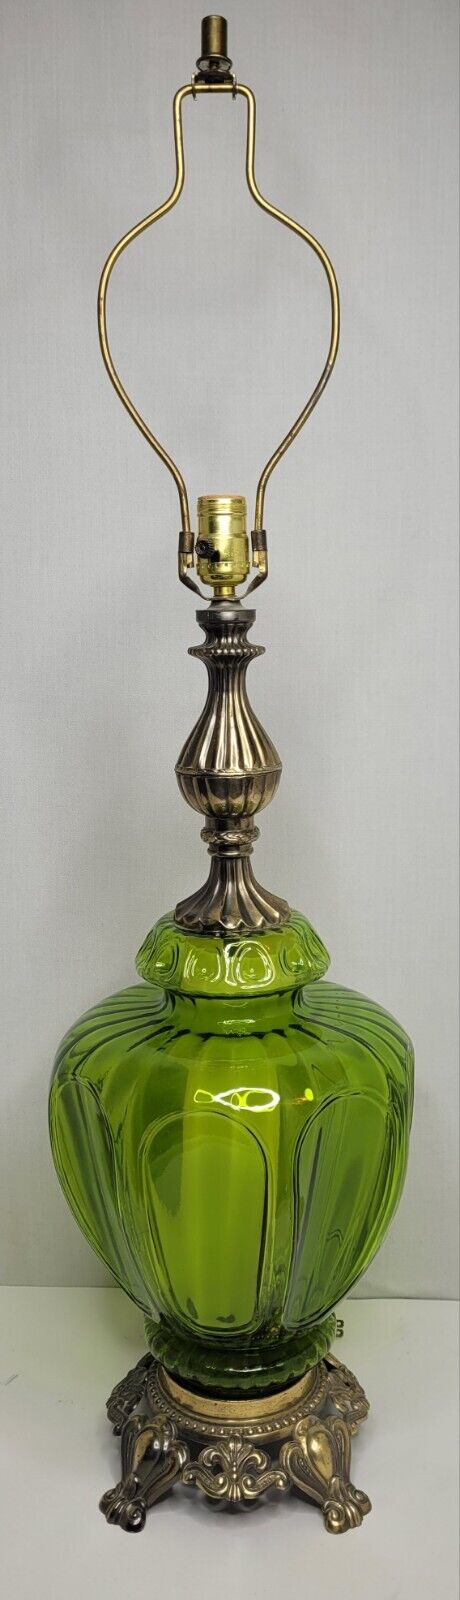 MCM Vtg Large Hollywood Regency Table Lamp Green Brass Cast Optic Diffuser 3-Way